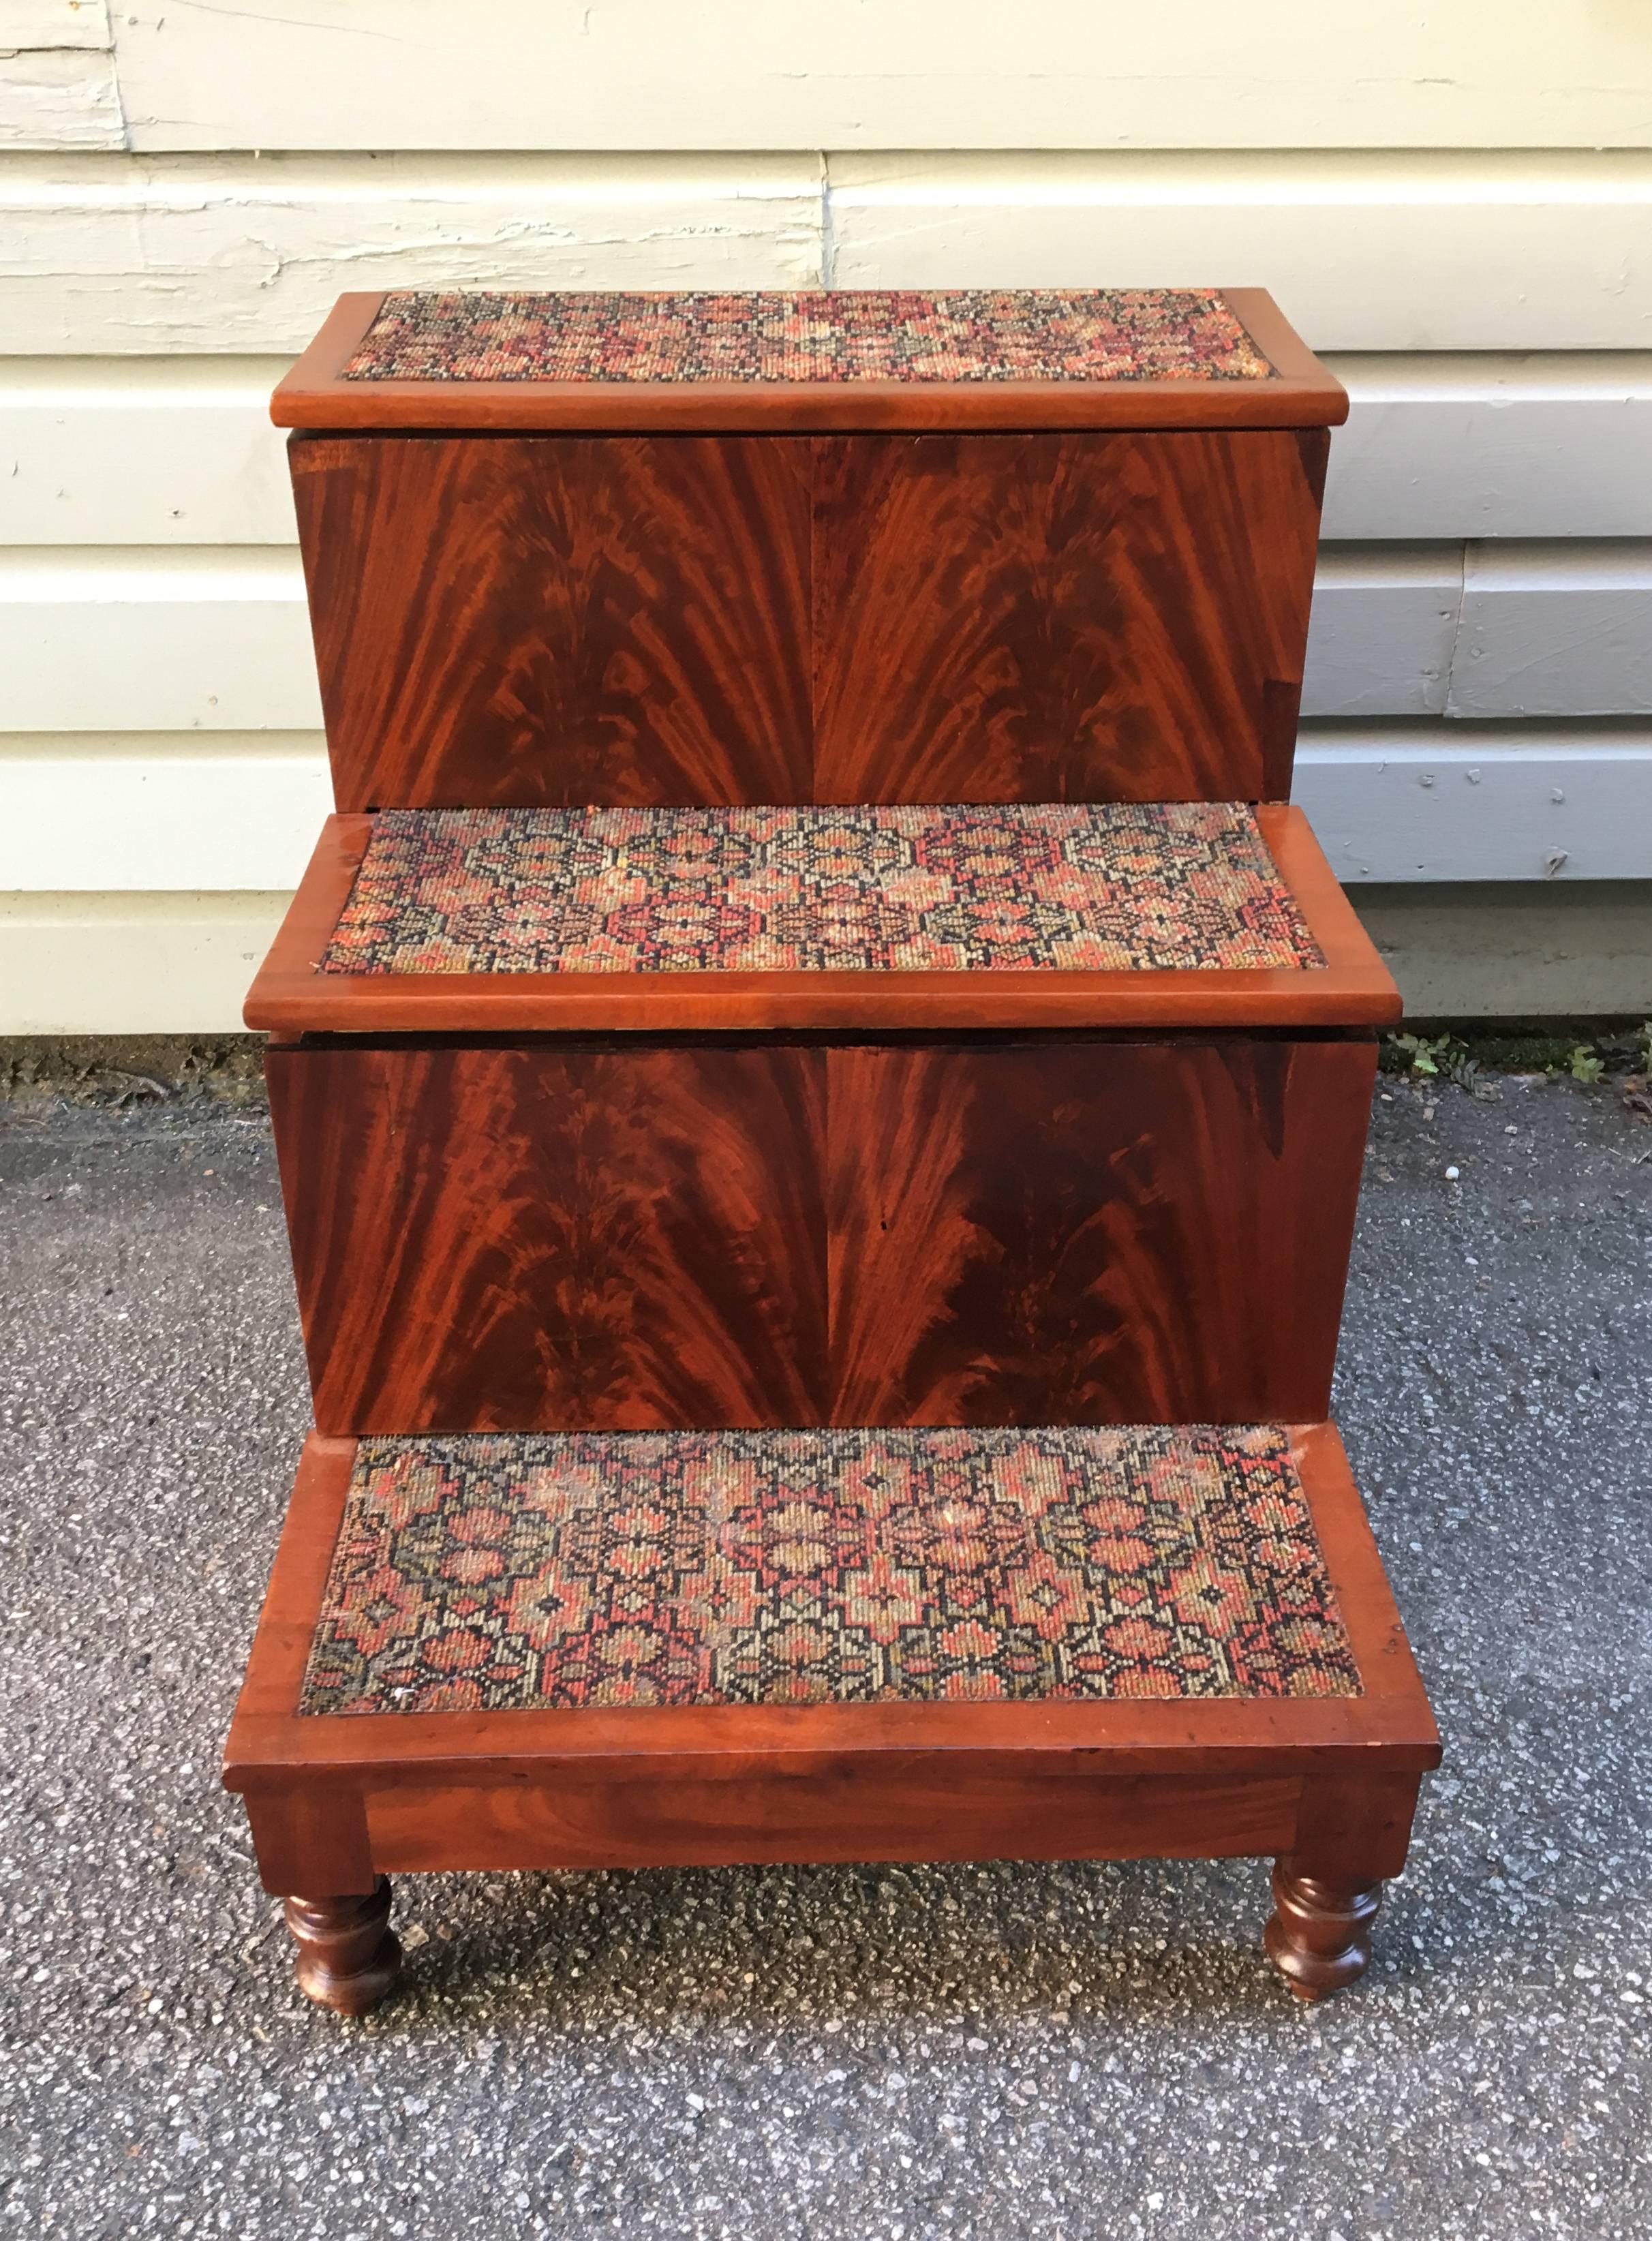 These Southern American bed steps have bookmatched flame mahogany on the risers. The turned Federal legs are solid mahogany and the case is mahogany veneer on poplar and white pine. The steps were originally purchased in Charleston, South Carolina,